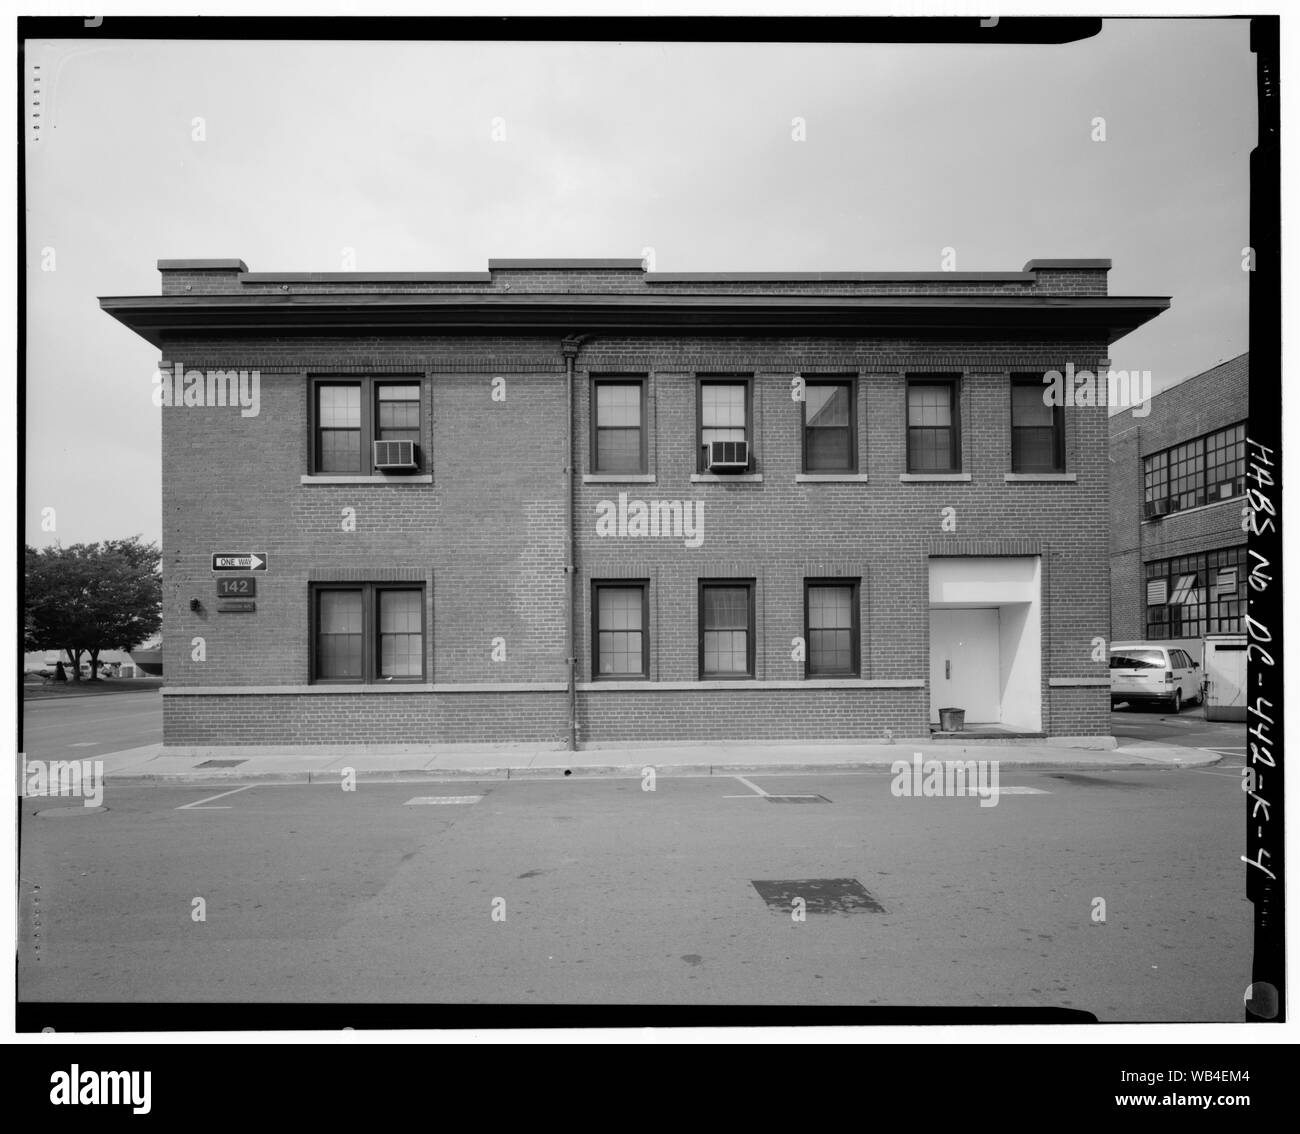 1.East elevation, looking west - Navy Yard, Building No. 142; East elevation, looking west - Navy Yard, Building No. 142, Intersection of Sicard Street & Patterson Avenue, Washington, District of Columbia, DC Stock Photo